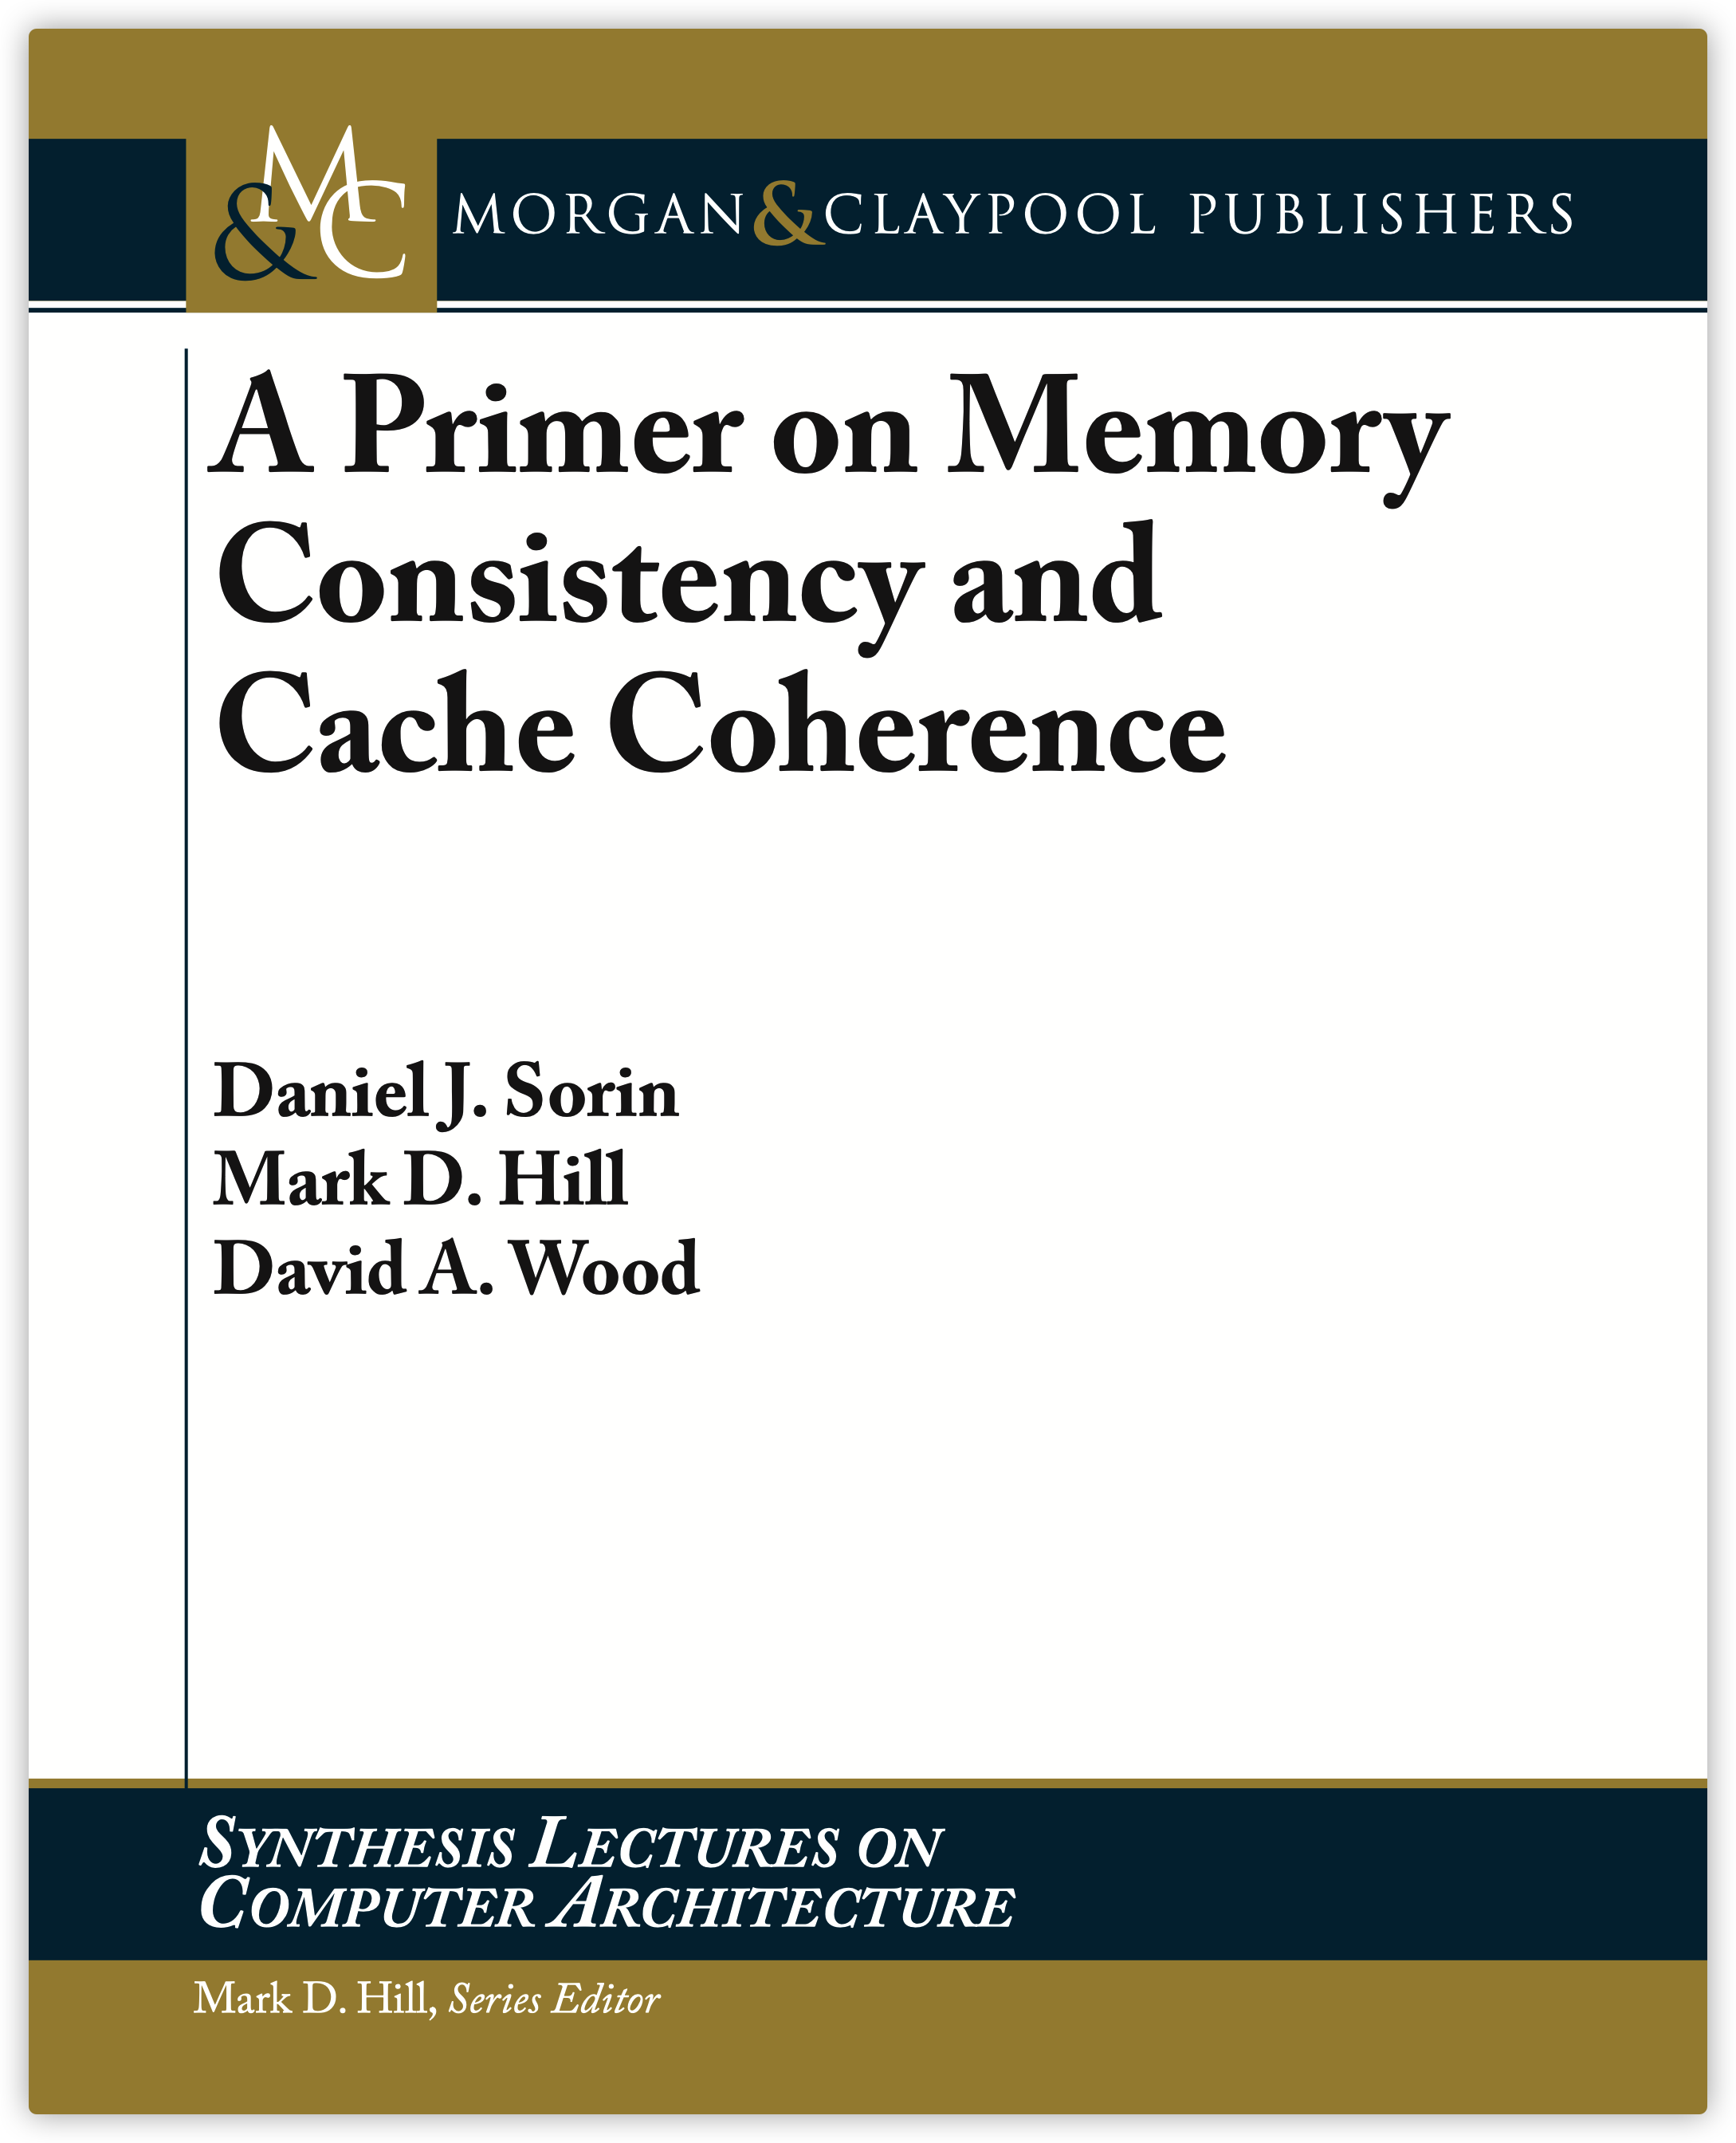 《A Primer on Memory Consistency and Cache Coherence》阅读总结